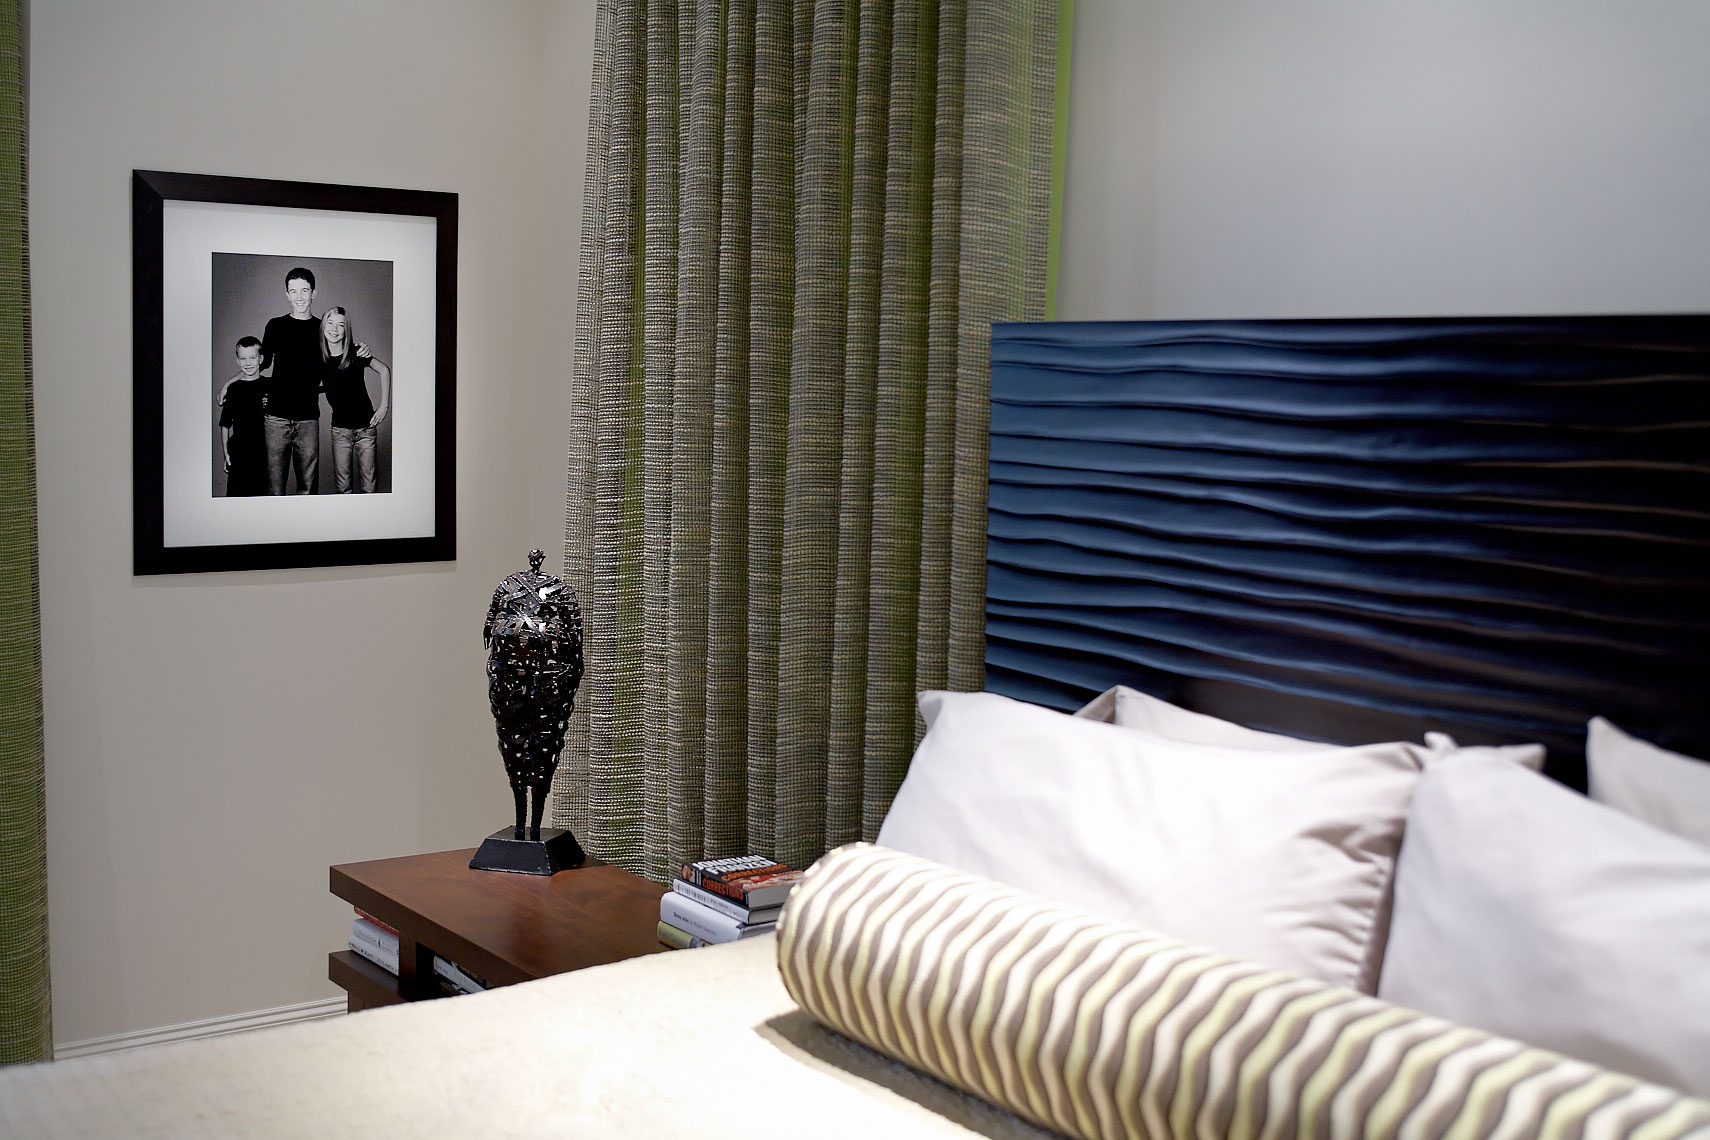  Vander Linden home gallery wall portrait in the bedroom  by Dallas, Texas photographer John Derryberry Photography